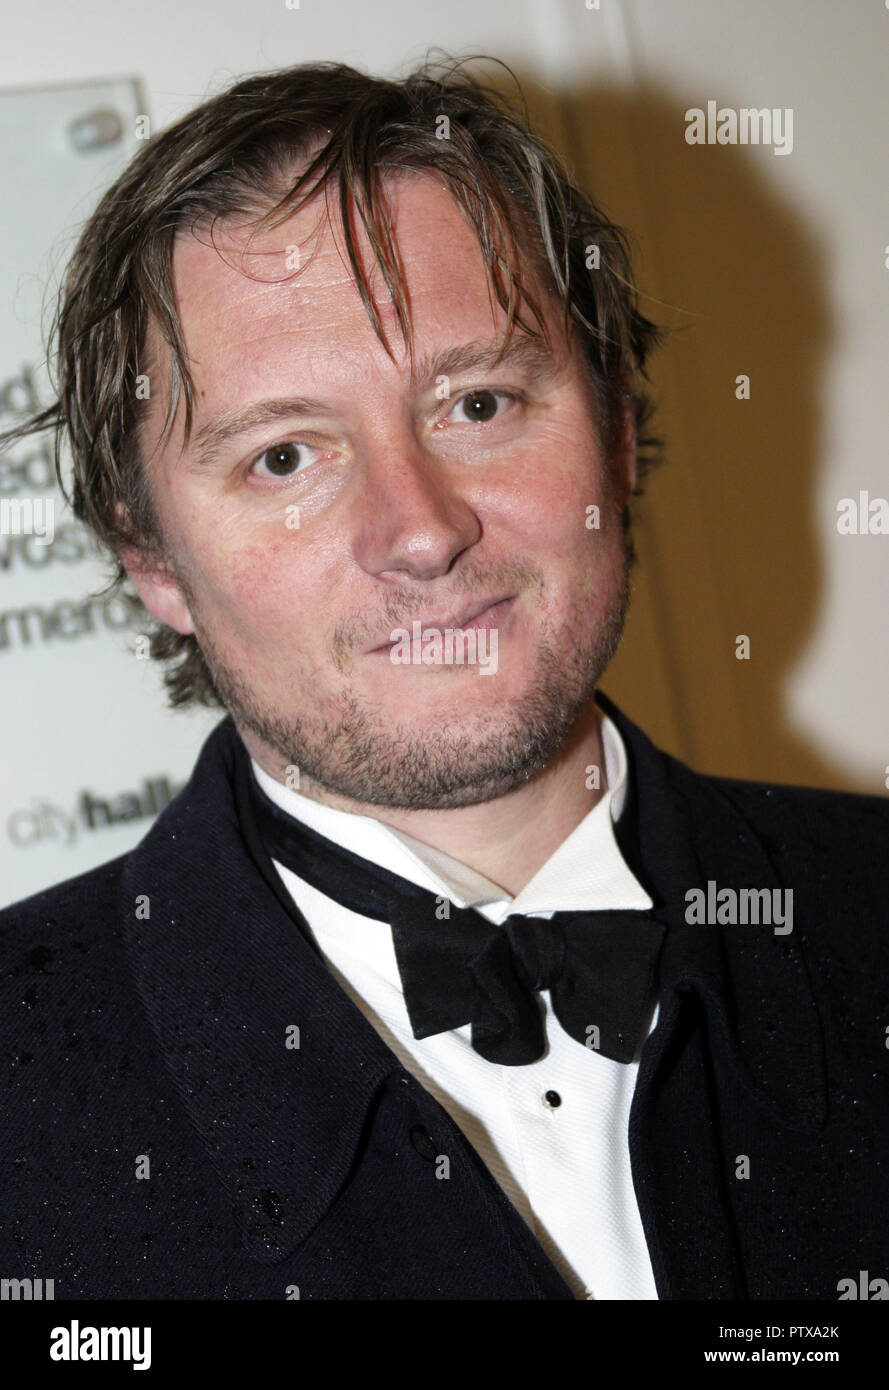 David Mackenzie is a highly regarded and multi award winning Scottish feature film director. His films include, Young Adam, Hallum Foe, Starred Up, Hell or High Water and this year, 2018, the historical epic - Outlaw King. He is one of the founders of the Sigma film production company in Scotland. Alan Wylie/ALAMY © Stock Photo